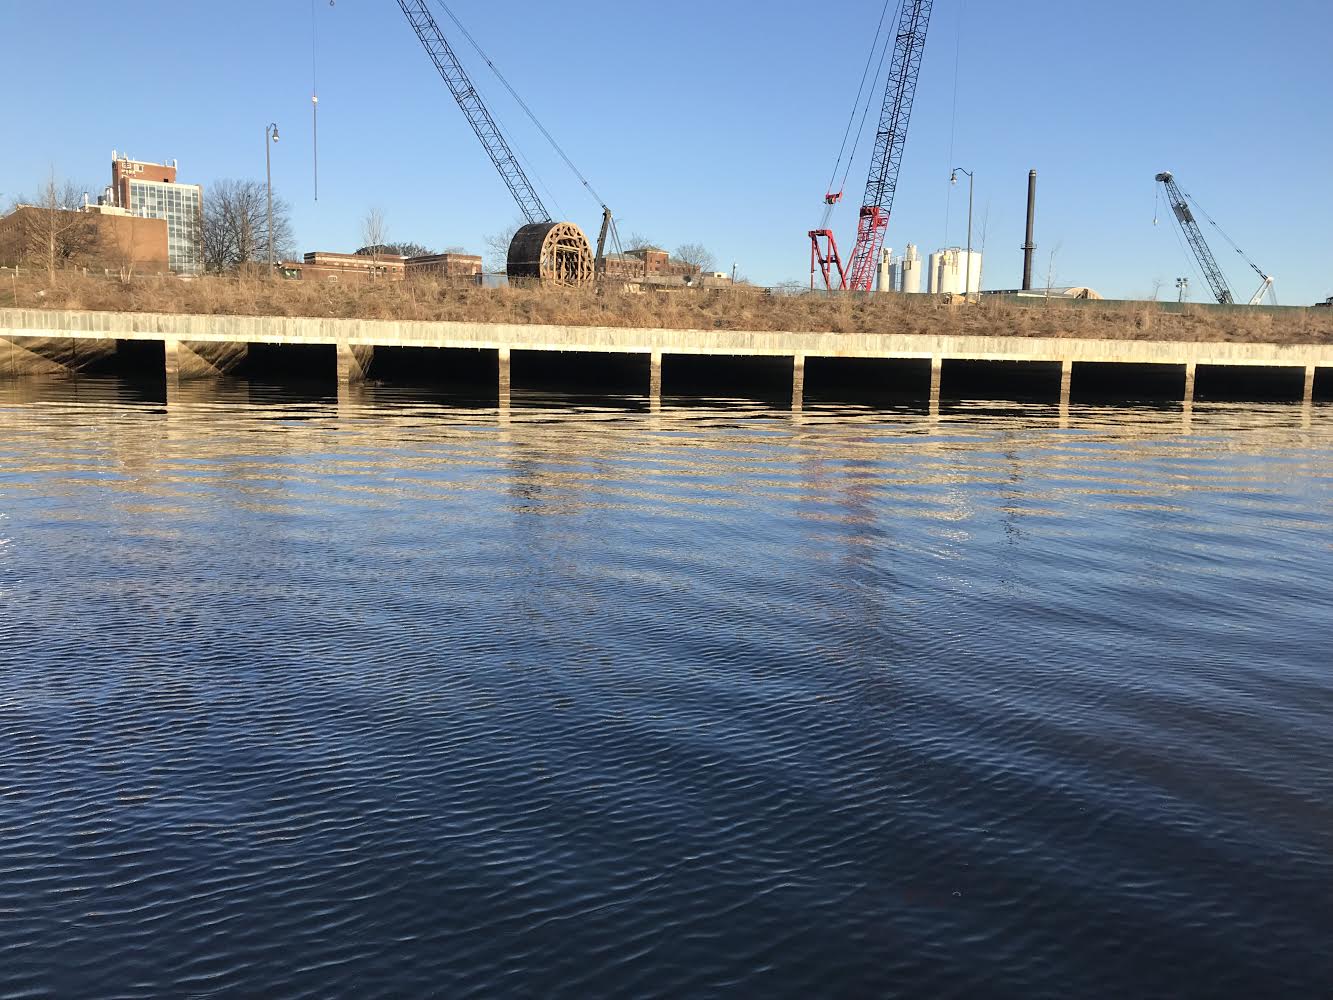 Before the Anacostia River Tunnel project was implemented, polluted waters would frequently overflow from these CSO outfalls into the river. Photo credit: Samantha Gleich